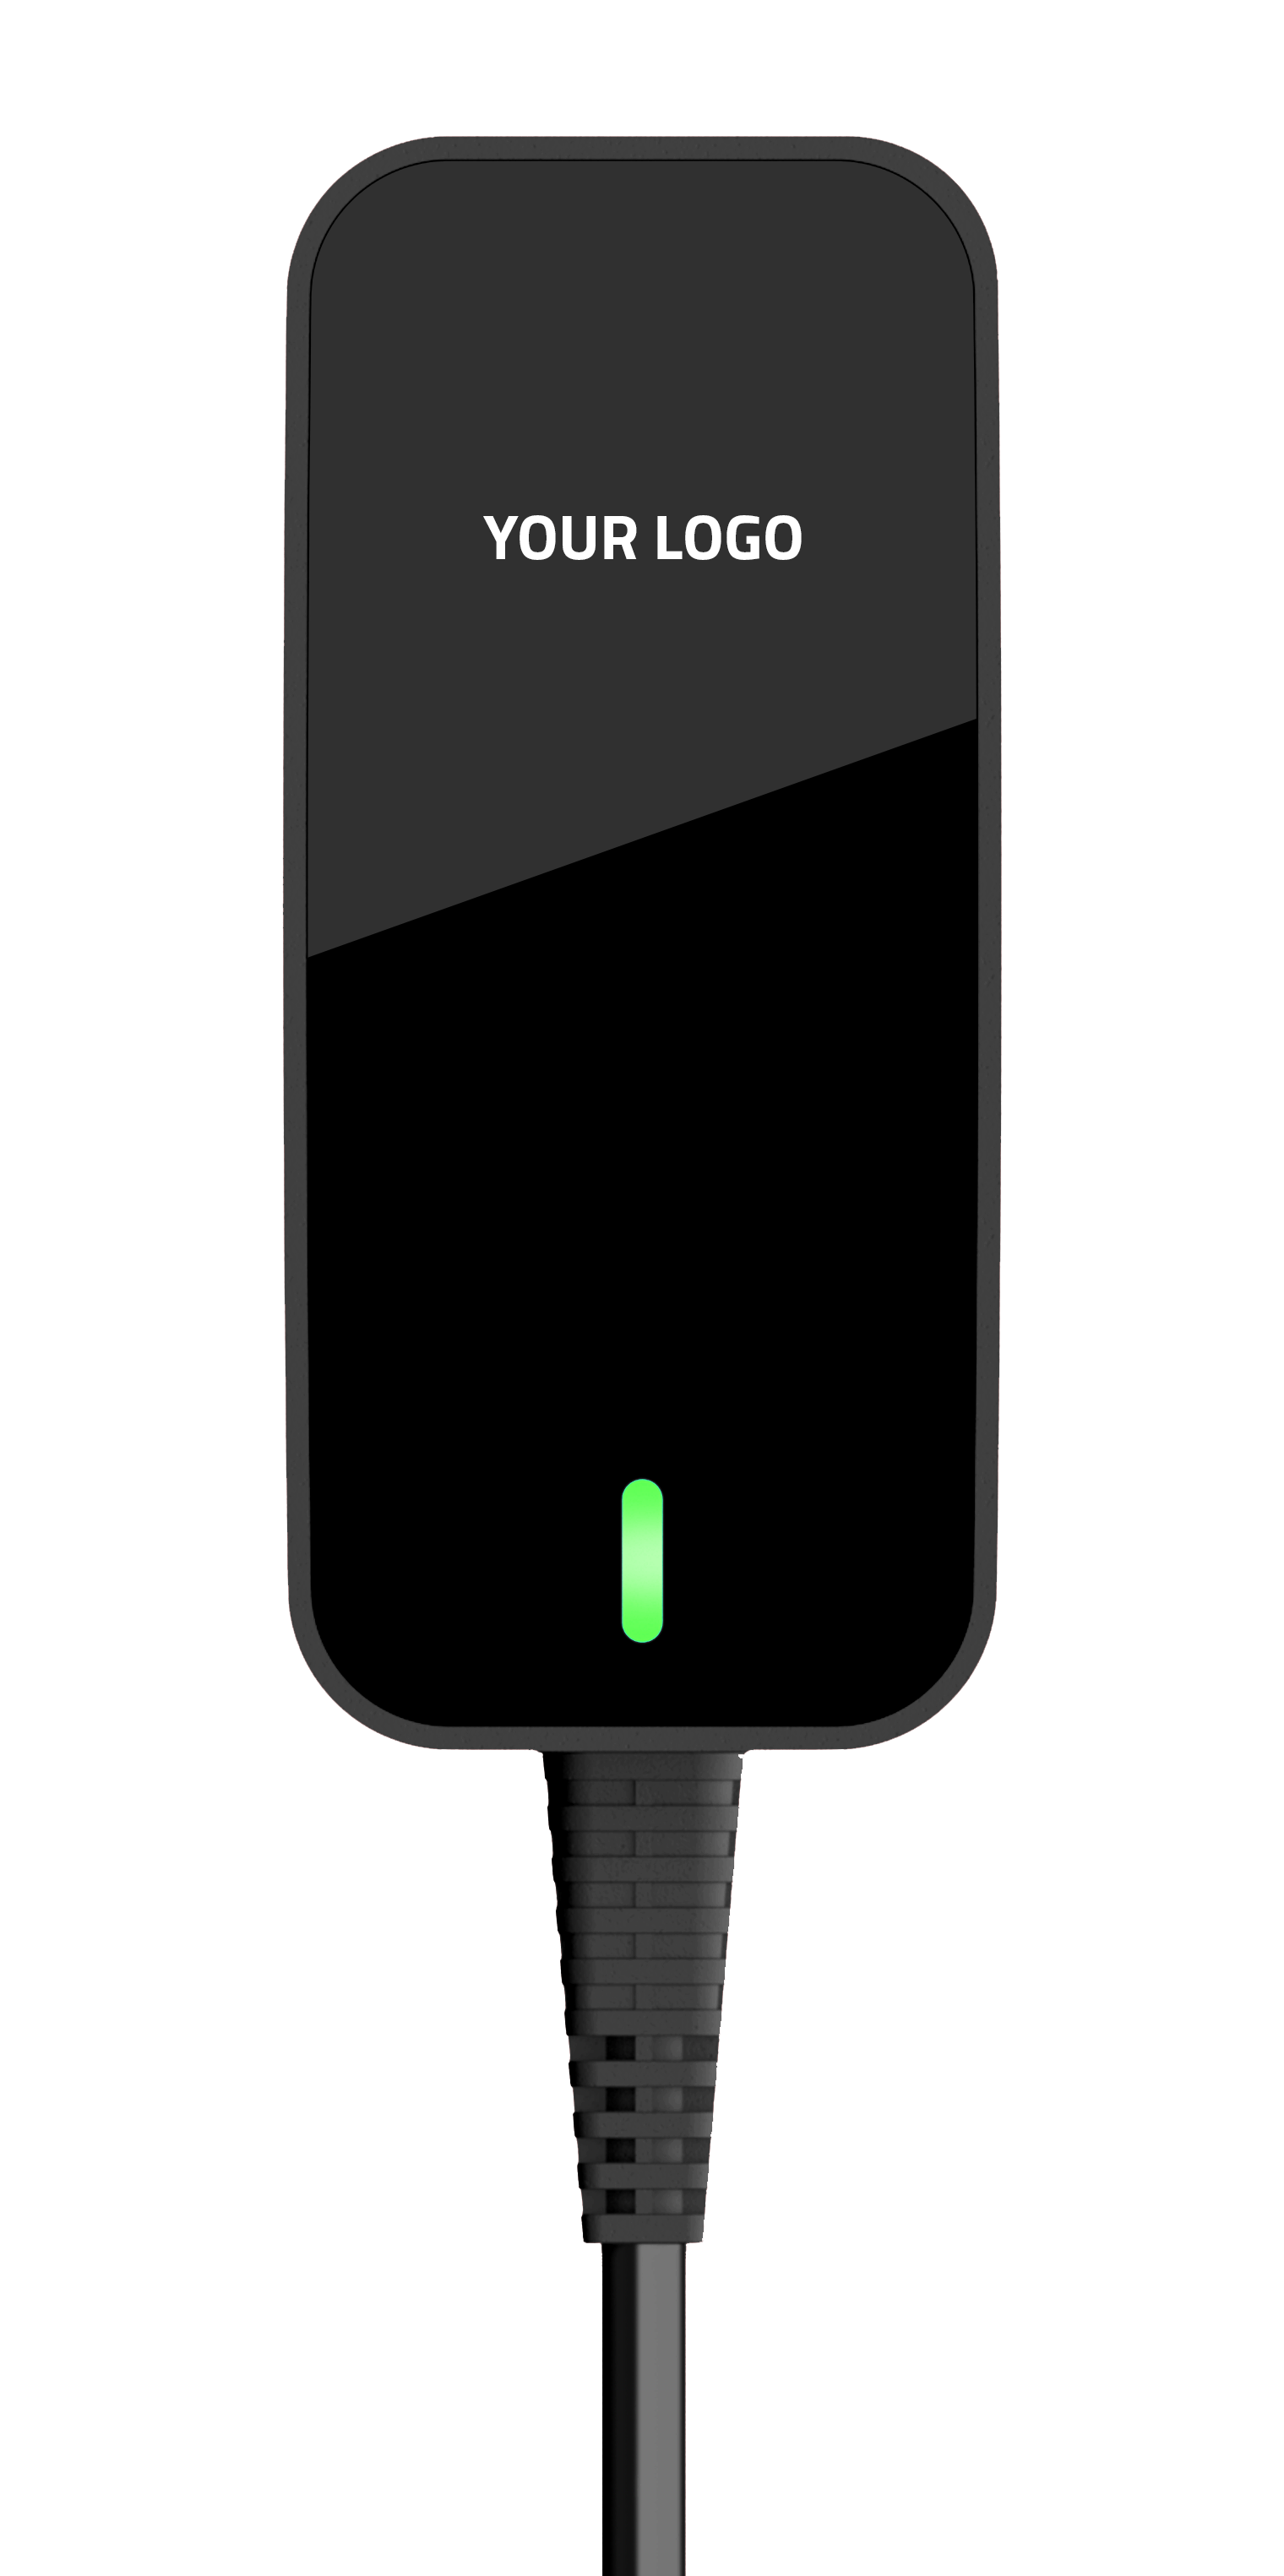 A black power supply charger with a green light on it.